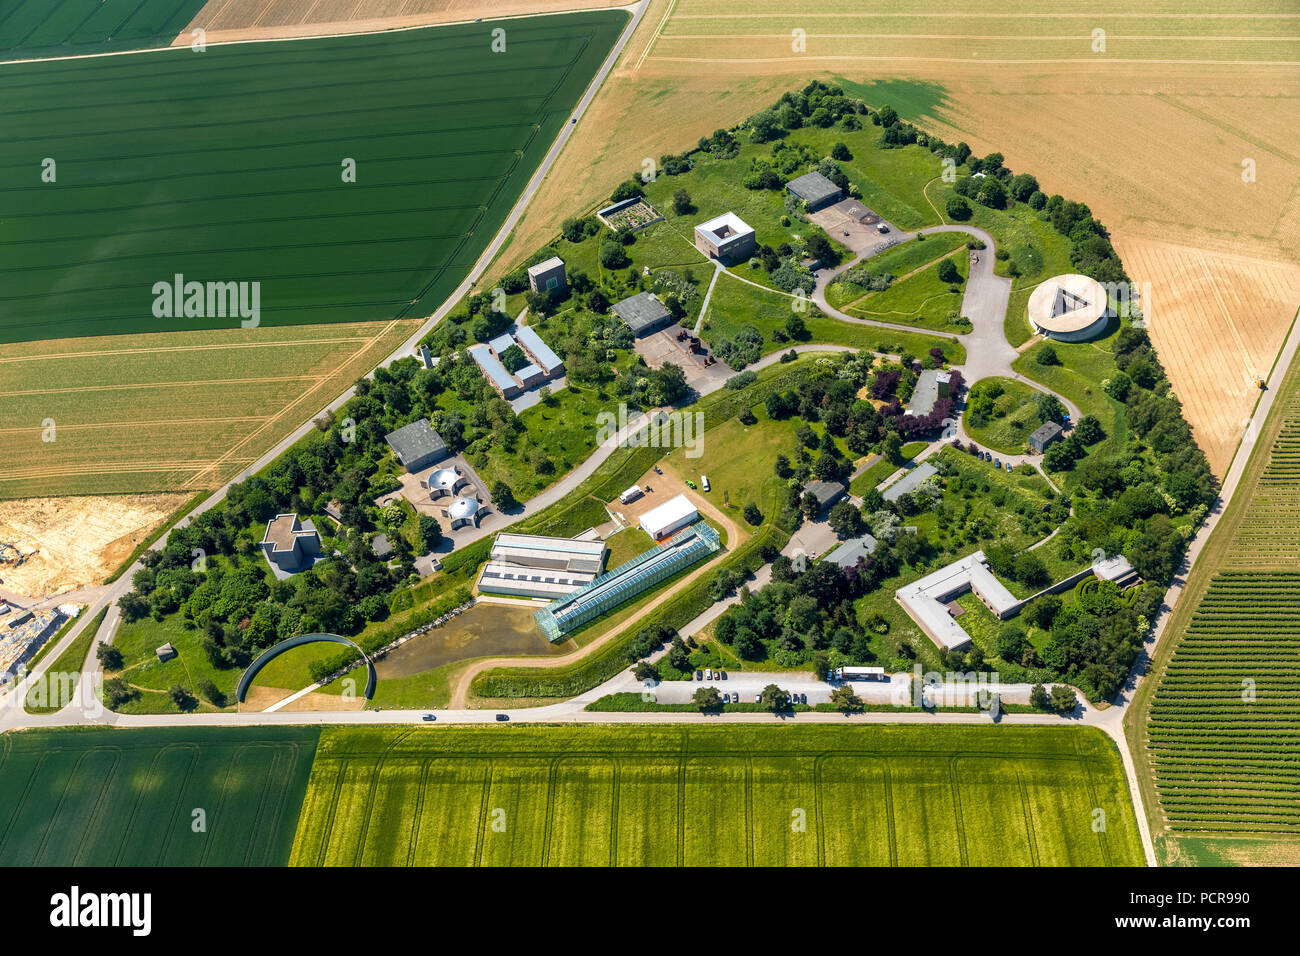 Project by Karl-Heinrich Müller, art collector, Langen Foundation, former NATO base in the middle of the lower Rhine landscape, art collection, cultural and art space project, Neuss, Rhineland, North Rhine-Westphalia, Germany Stock Photo